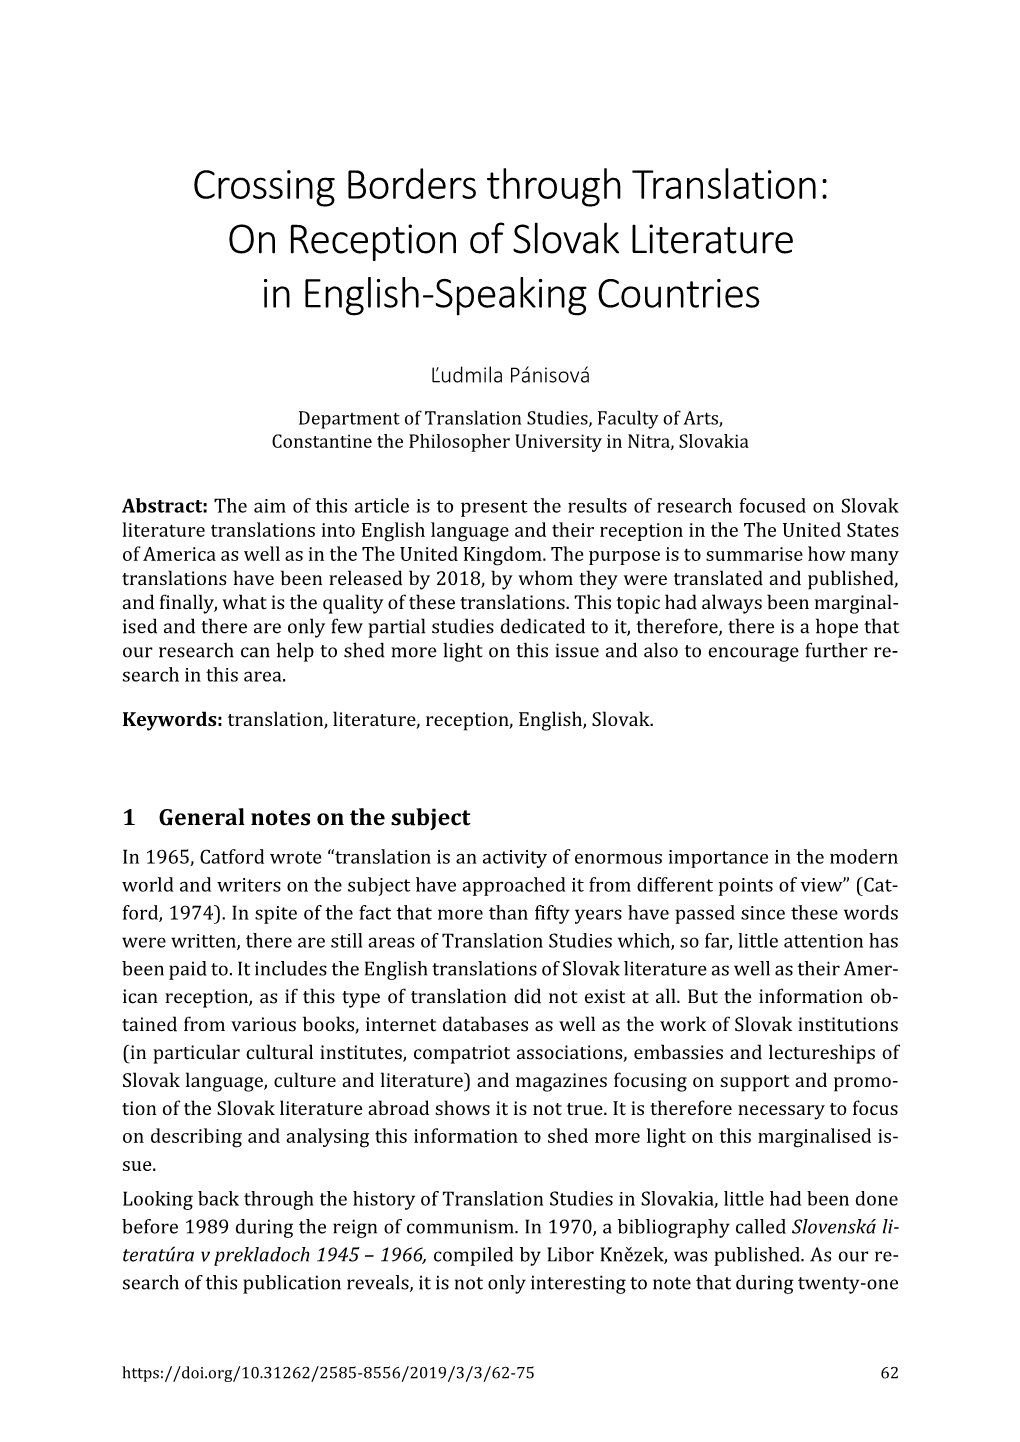 Crossing Borders Through Translation: on Reception of Slovak Literature in English-Speaking Countries